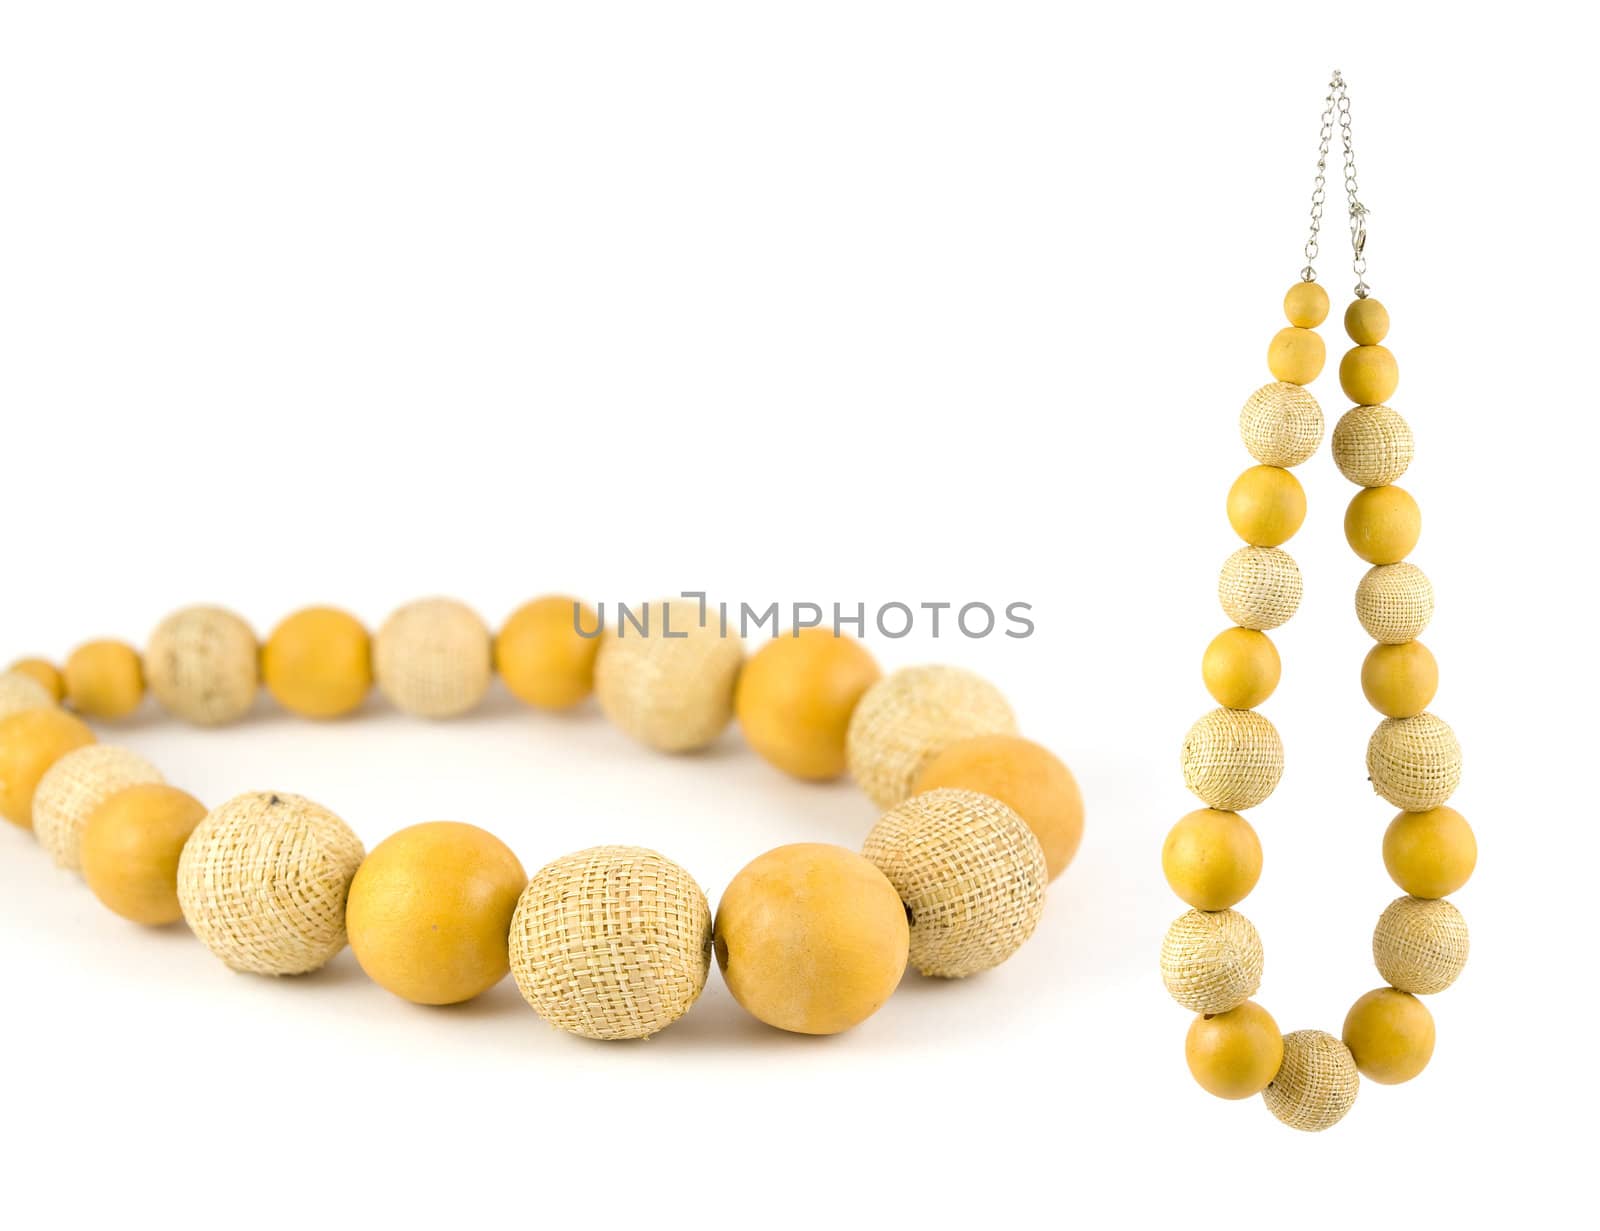 Lovely necklace made from yellow wooden balls and balls made of cloth. Isolated on pure white background. Copy-space.